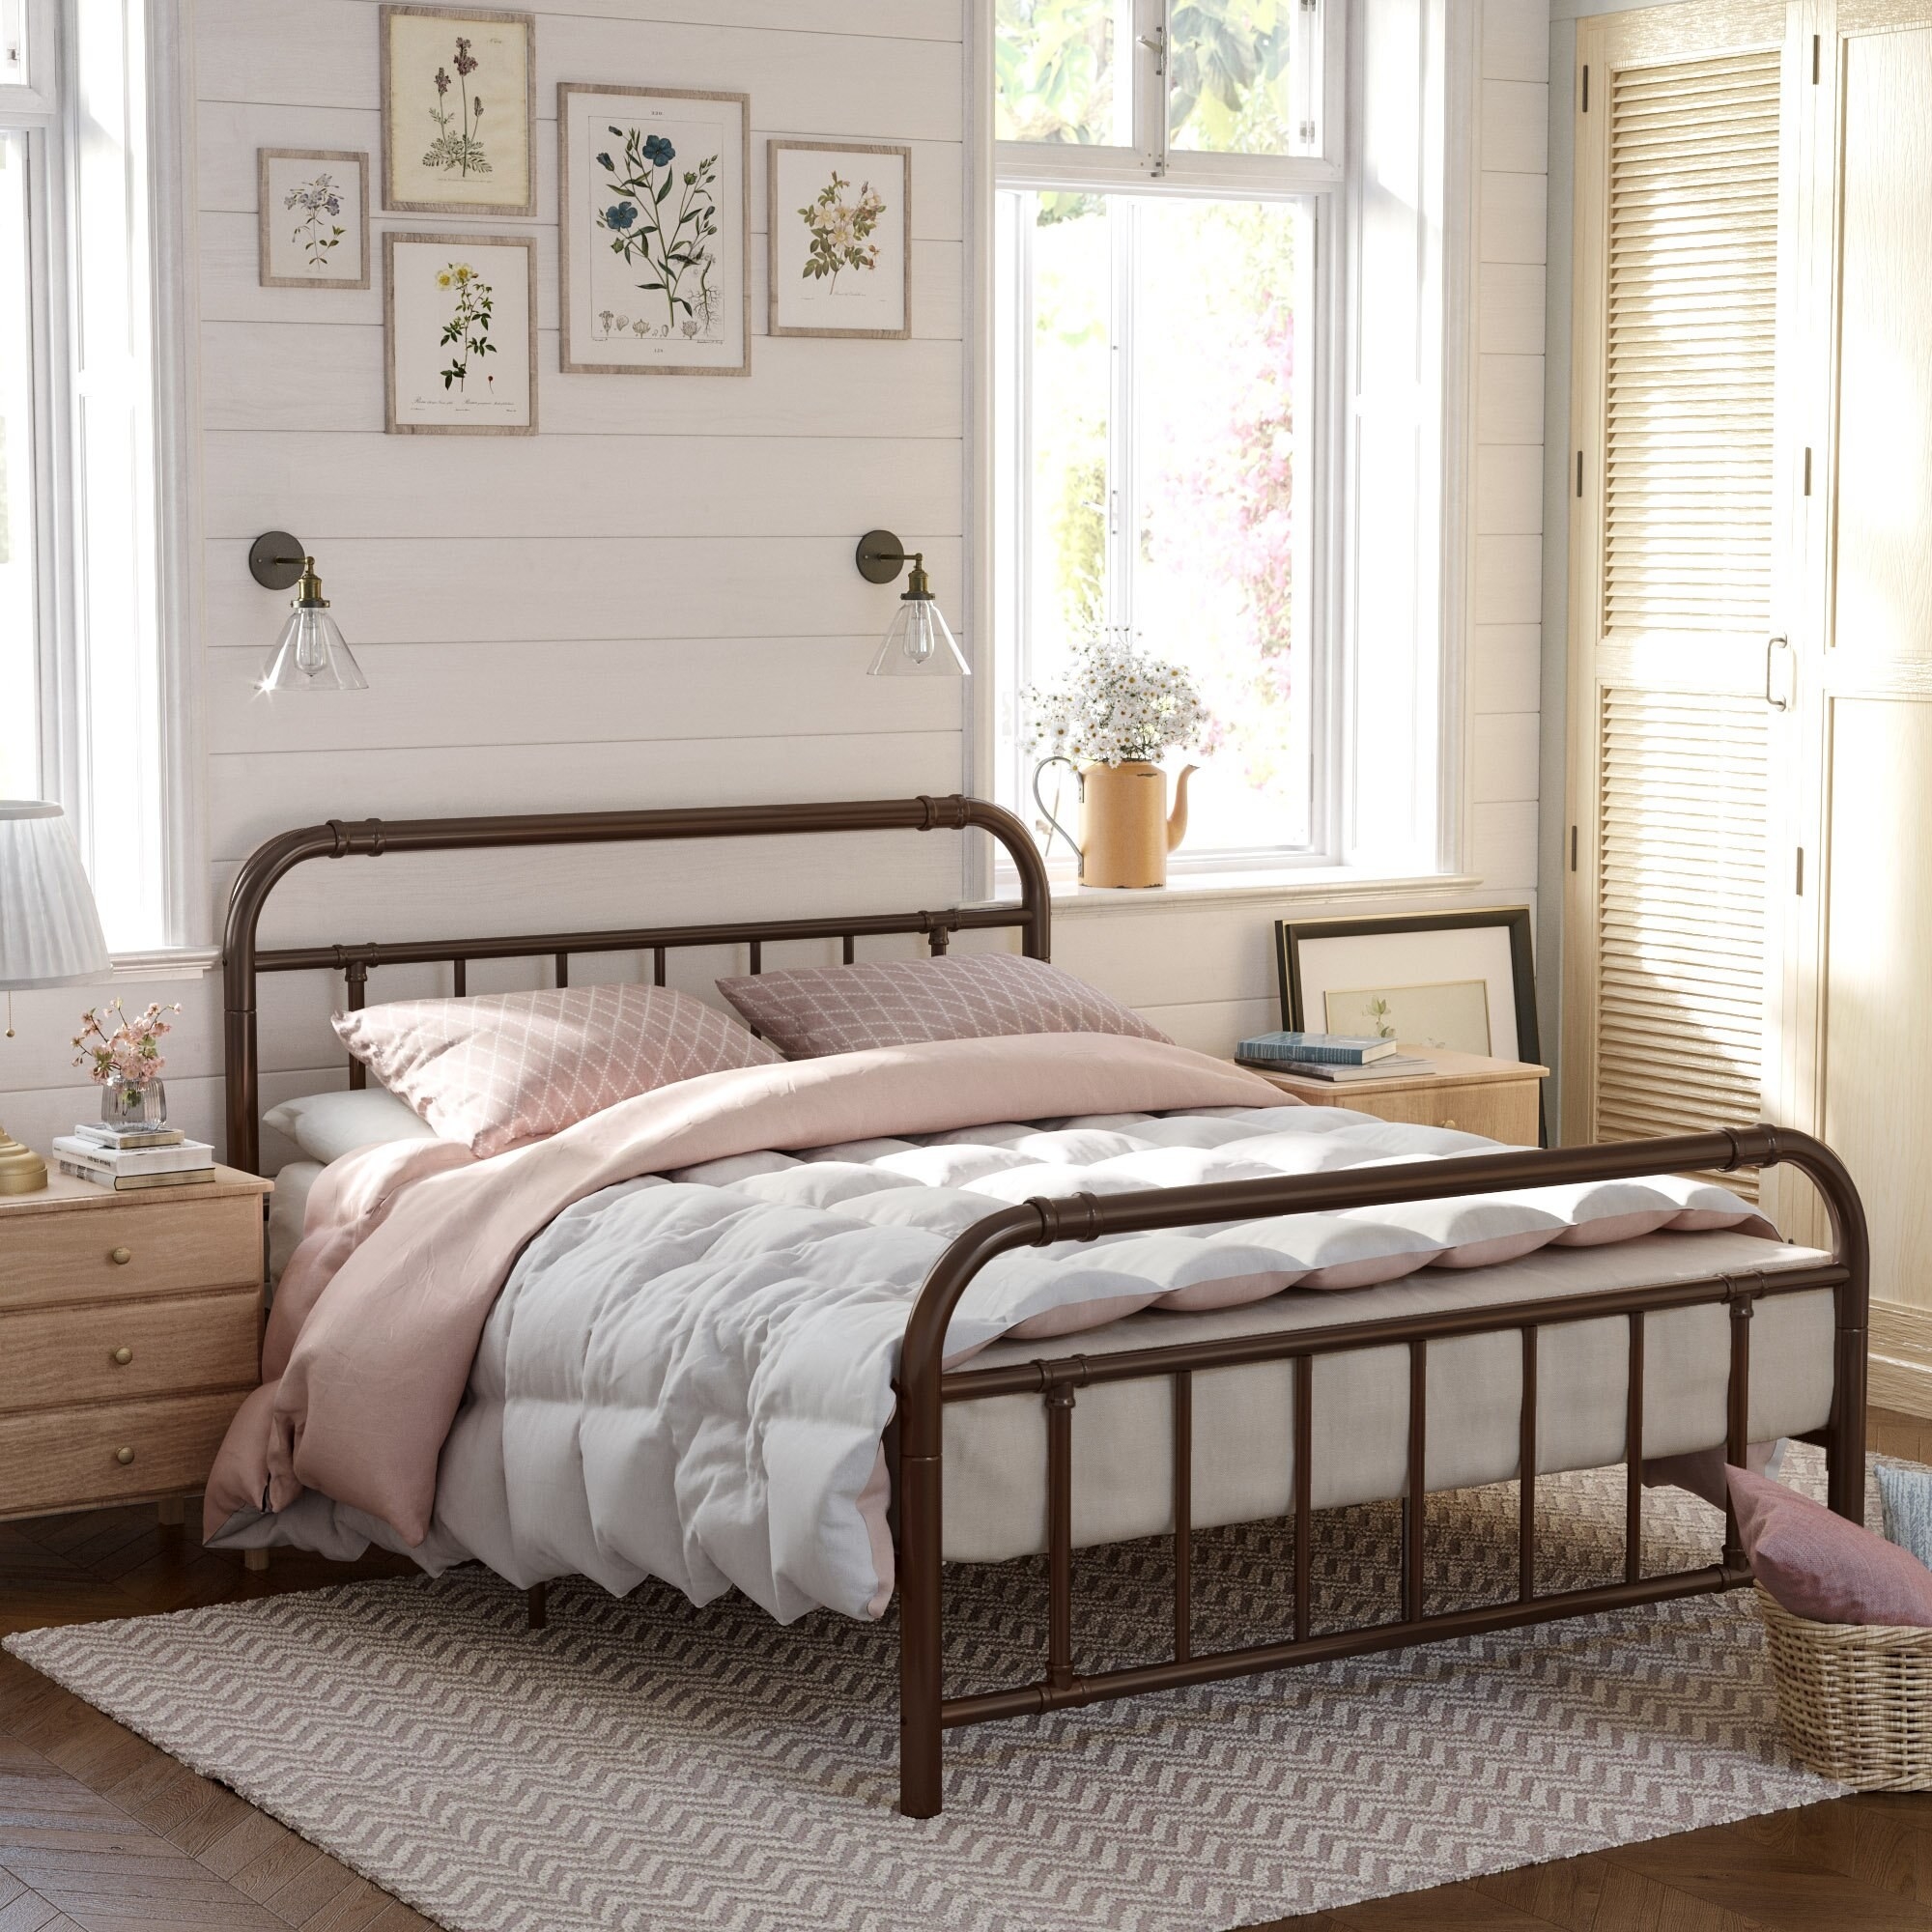 27 Bed Frames That Only Look, Bed Frame Cost